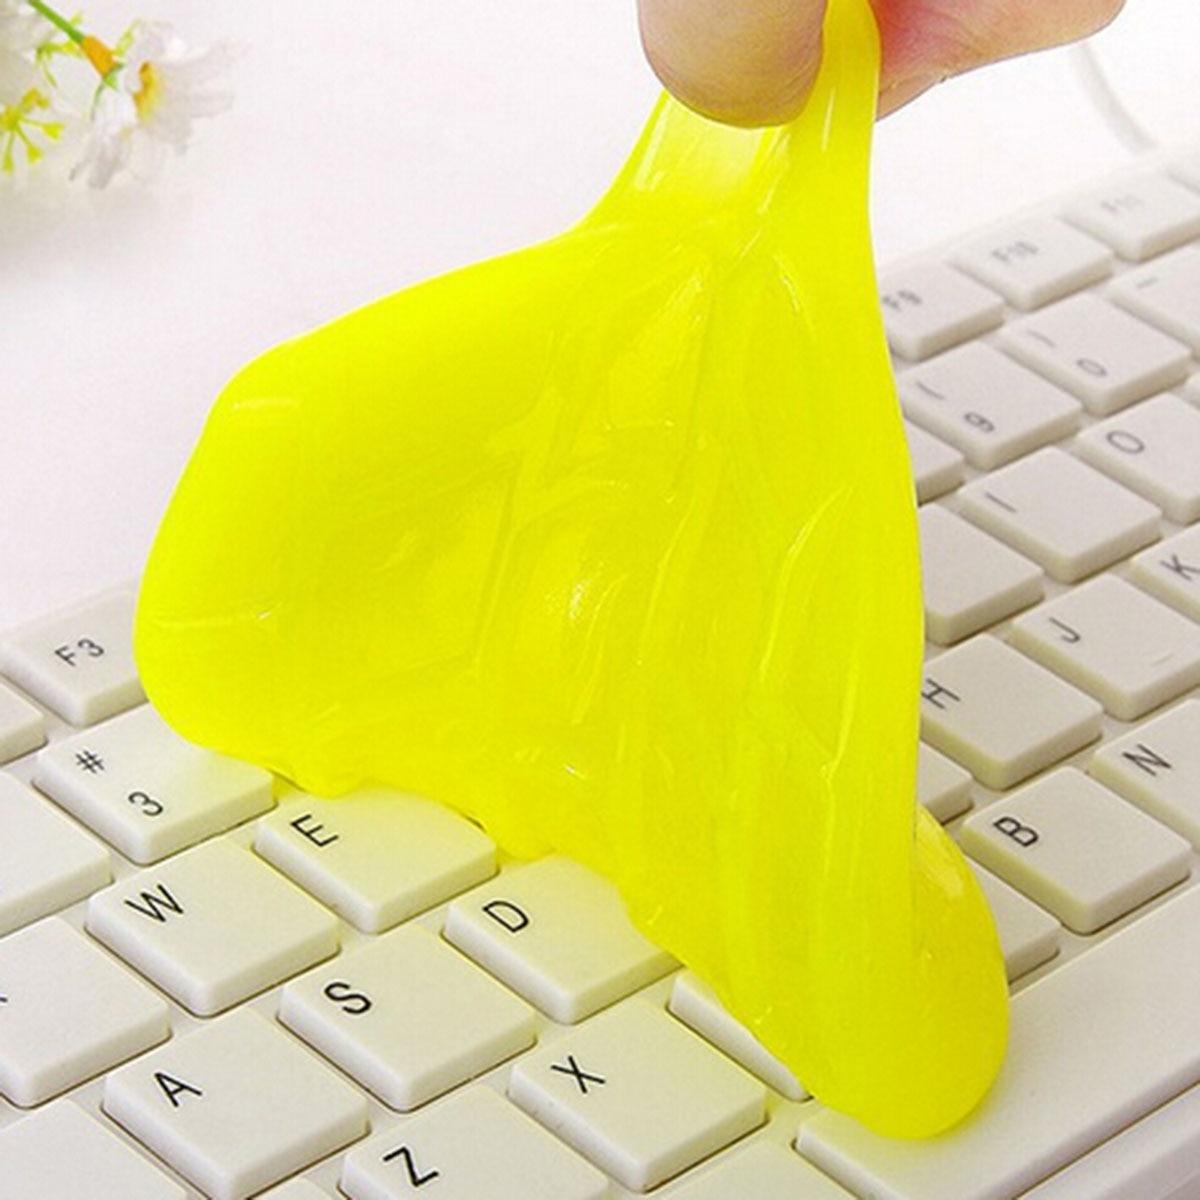 Computer dust cleaning keyboard clean computer pc dust cleaning gel cleaner Knead for 30 seconds before use